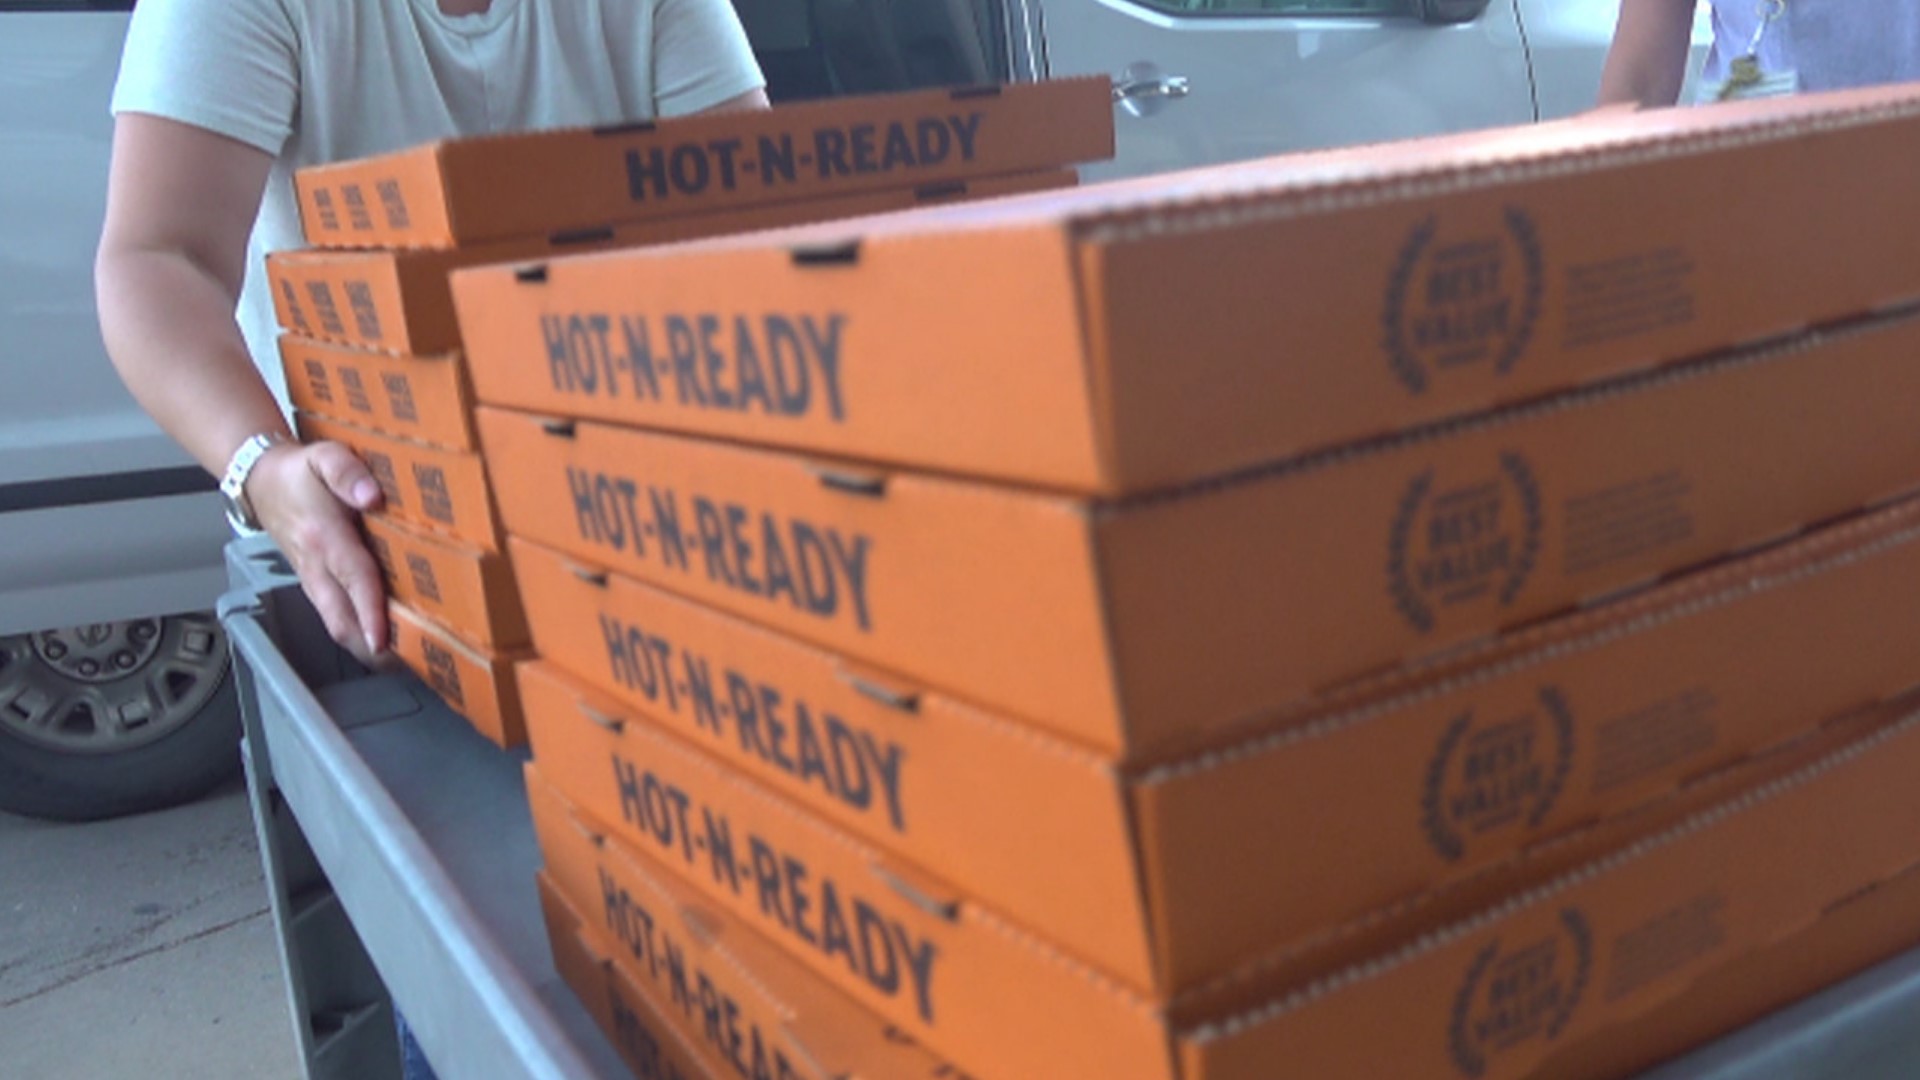 Midlanders came together to give 90 pizzas to employees working at Midland Memorial Hospital.